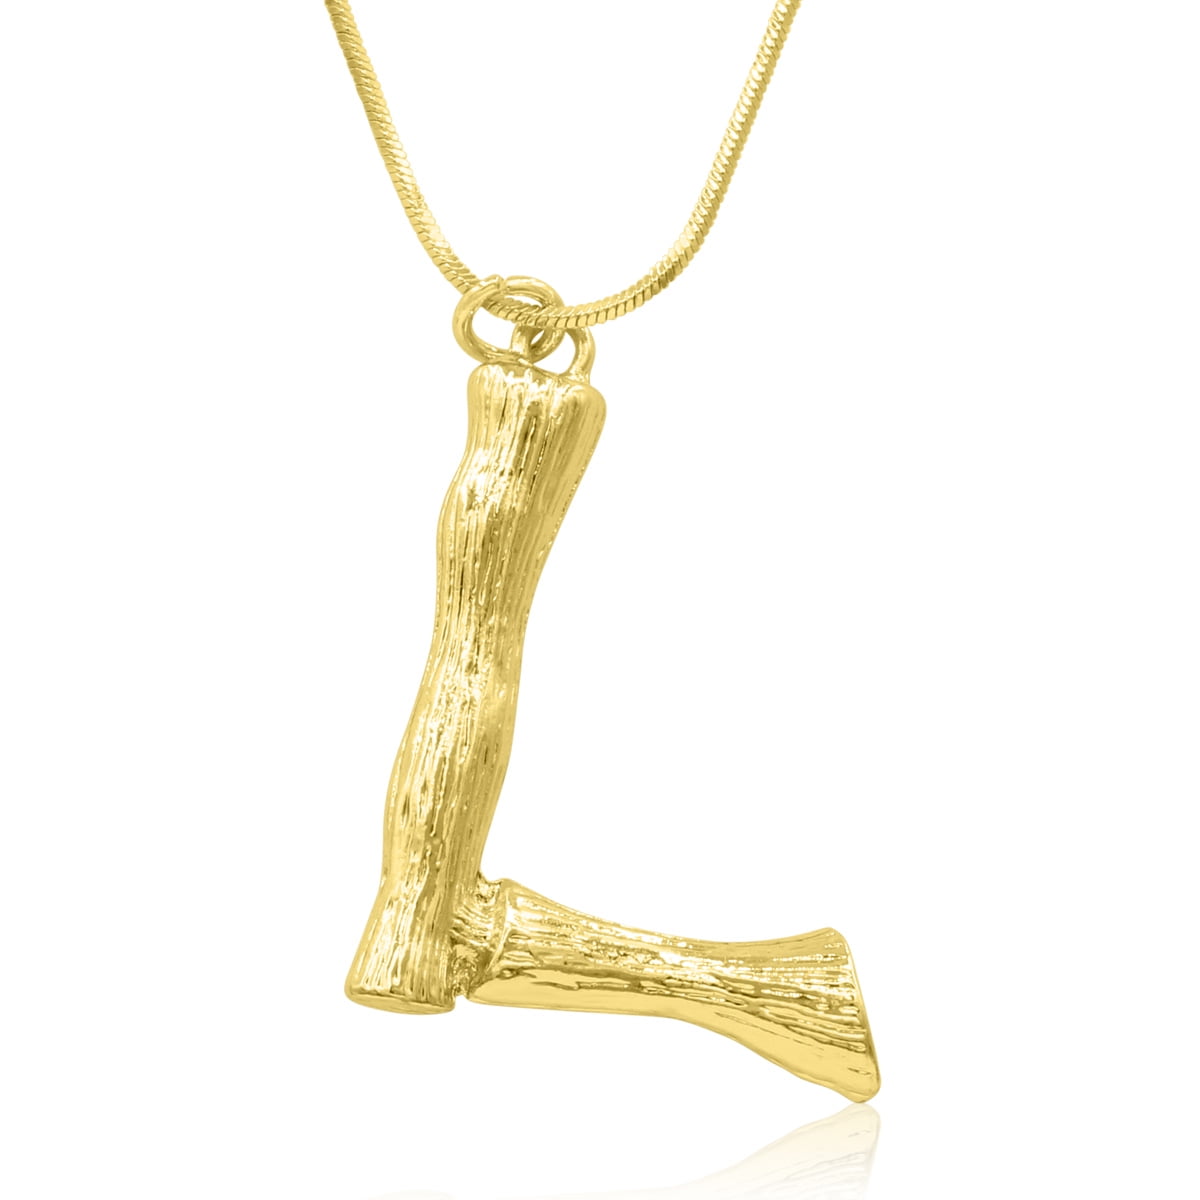 SuperJeweler L Initial Necklace in Gold Bamboo Style All Letters Available Free 18 inch Snake Chain for Women 7e3b1254 32eb 4acc be60 b786ead30a8b 1.ae3715268034db4b4e9c7a9b2e55f88b